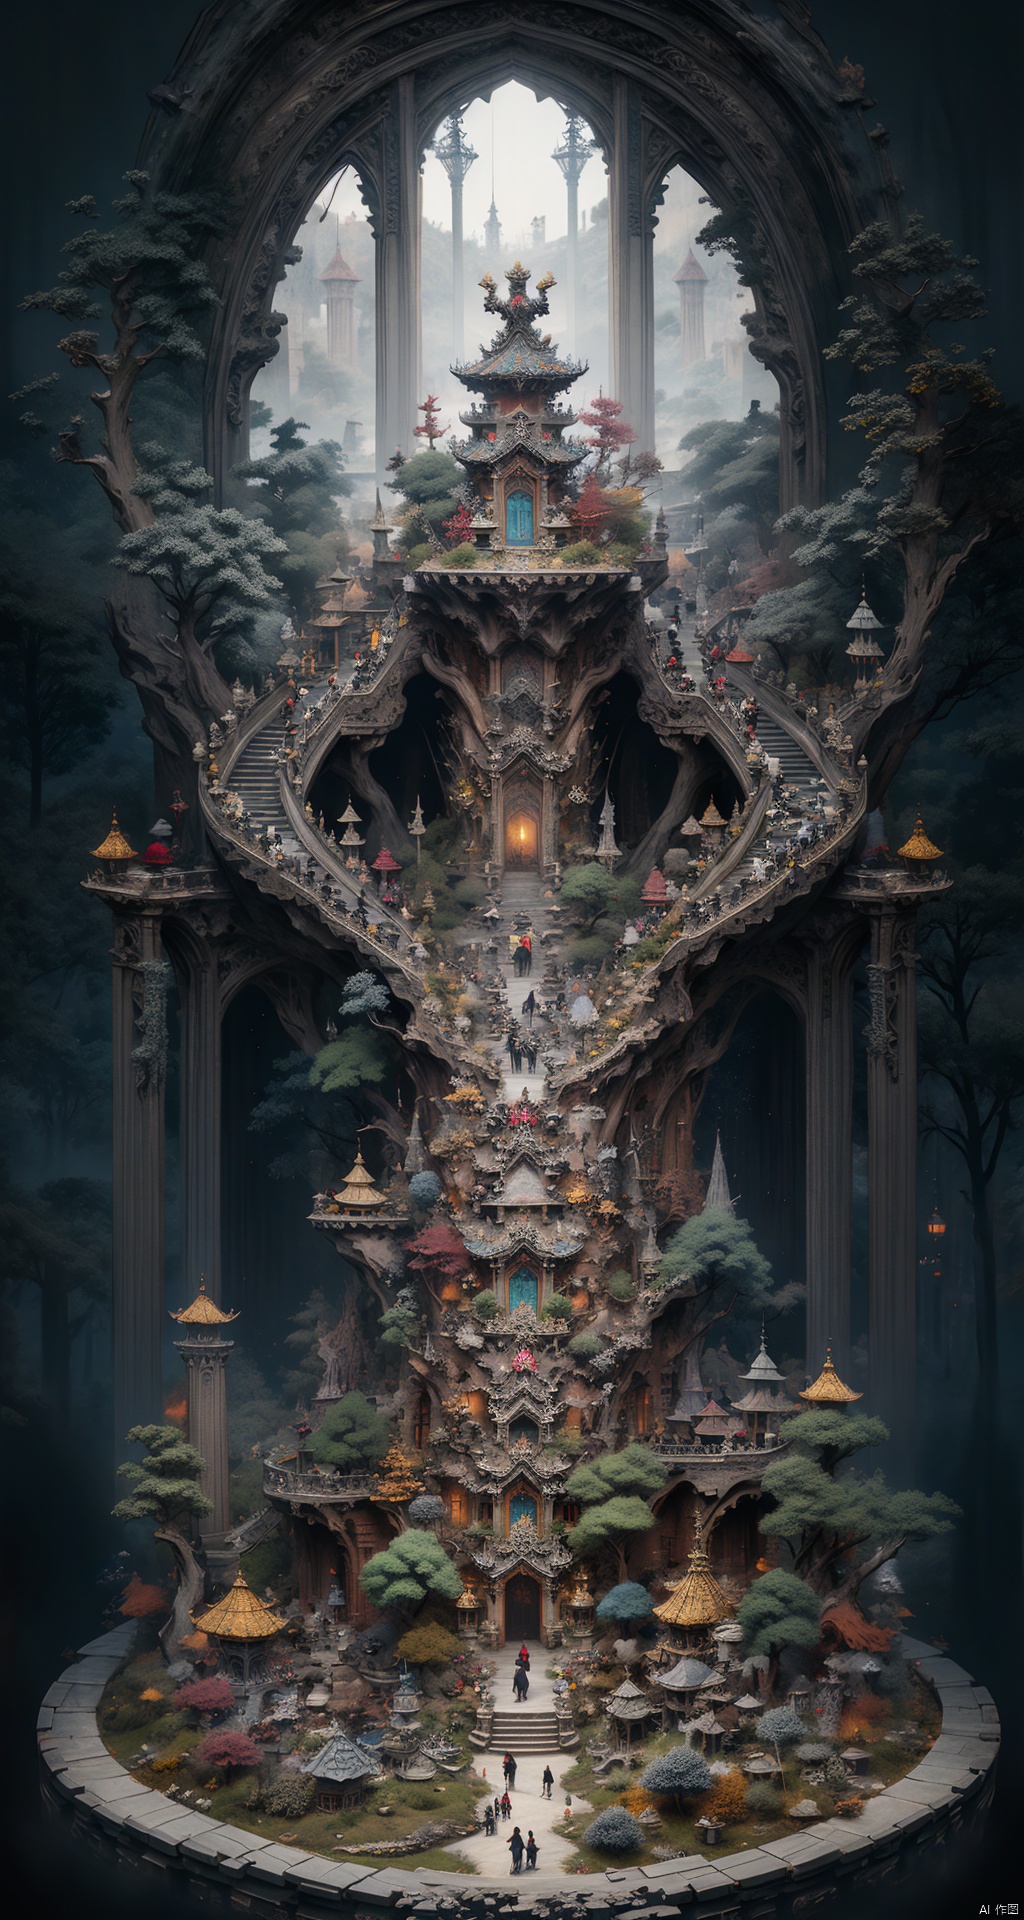  Enigmatic Fantasy Forest: Enter a realm of enchantment and wonder captured through the lens of a visionary photographer. This picture-perfect diorama, rich in fantasy style, unveils a lush forest teeming with whimsical elements. Trees adorned in vibrant hues of greens and golds tower above, while magical creatures, including Chinese dragons, with intricate dragon claws and flowing Ryuu tails, take flight through the dappled sunlight. It's a scene that transports viewers to a world where imagination knows no bounds.